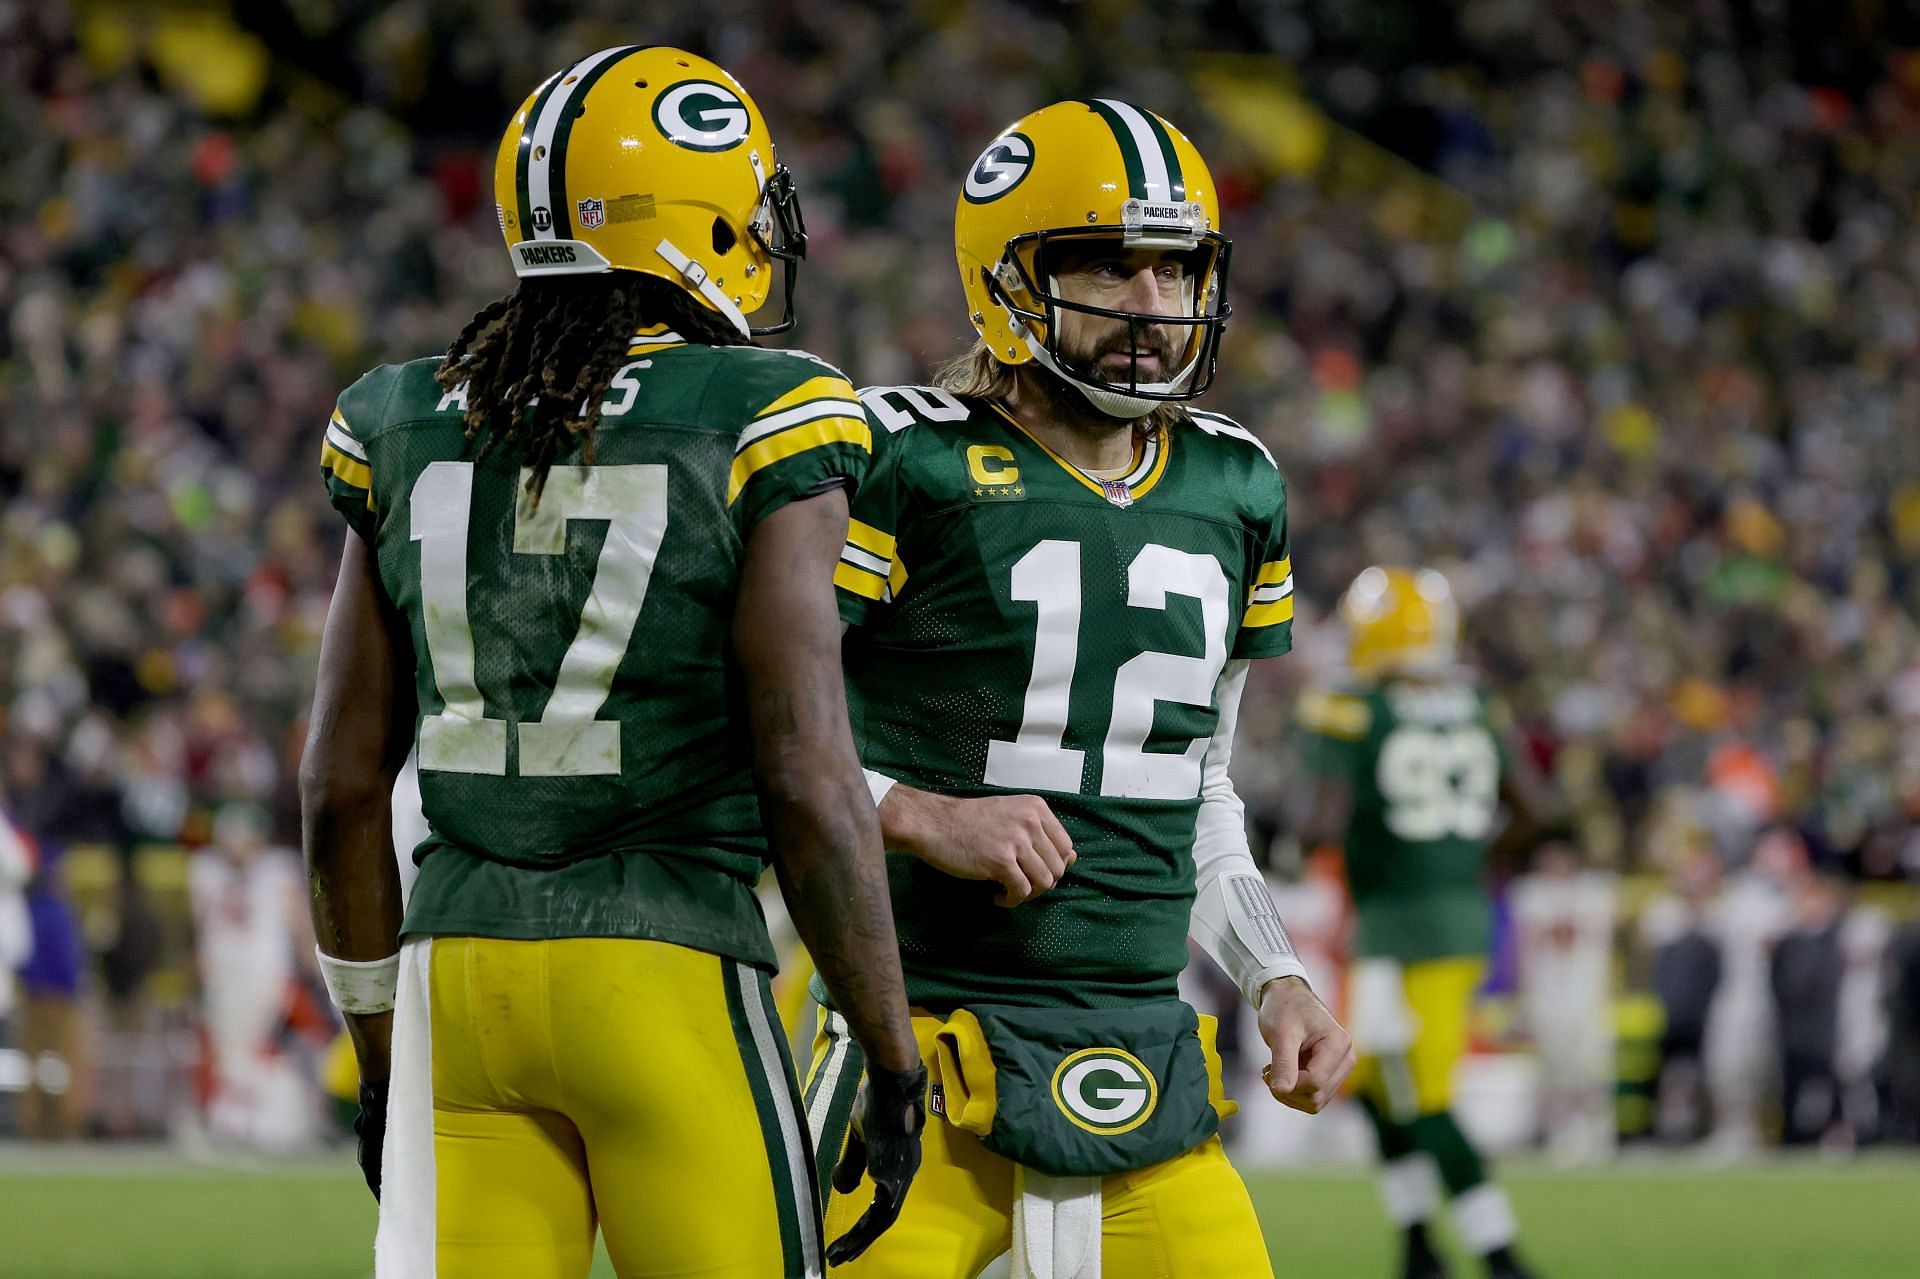 Davante Adams #17 and Aaron Rodgers #12 of the Green Bay Packers